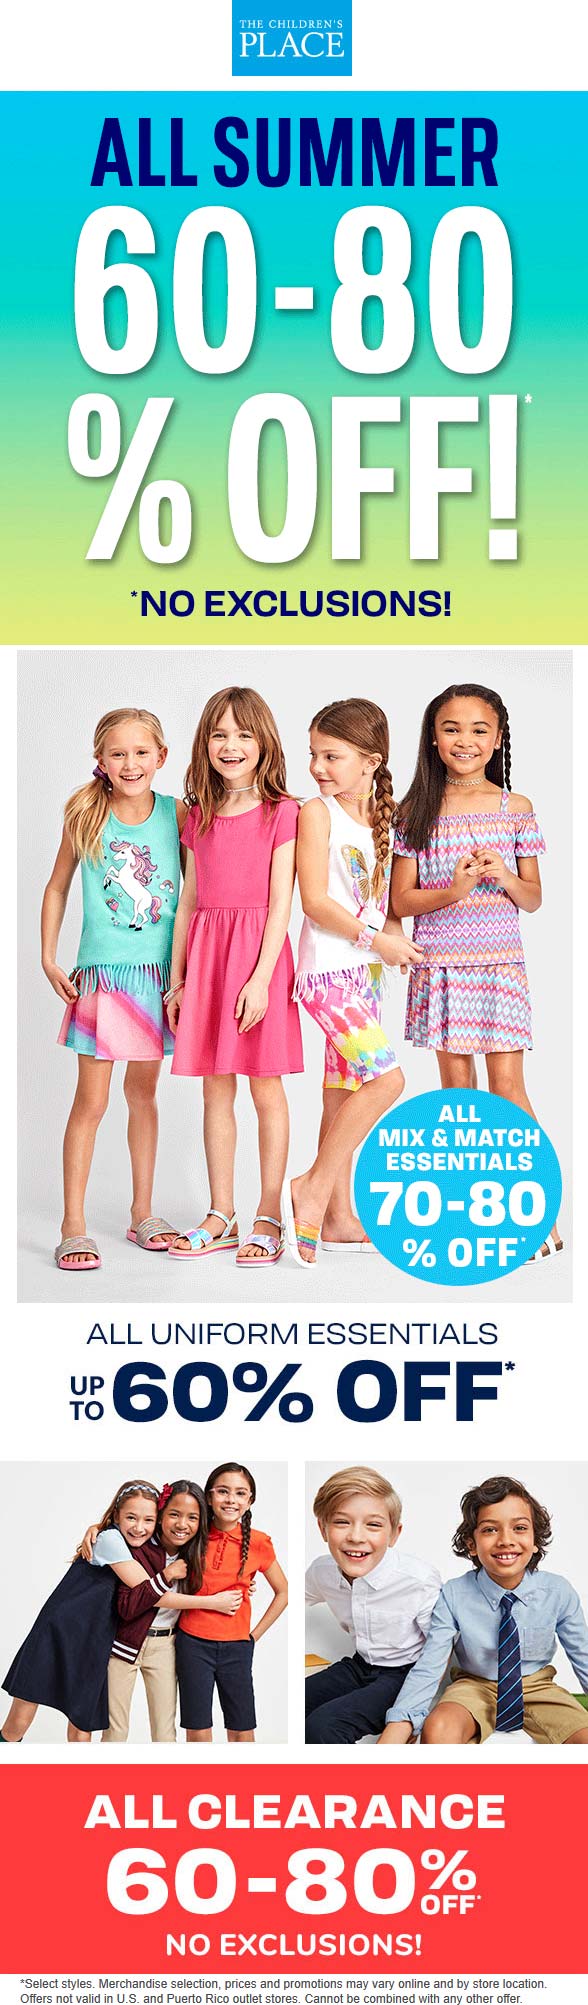 The Childrens Place stores Coupon  All summer 60-80% off at The Childrens Place #thechildrensplace